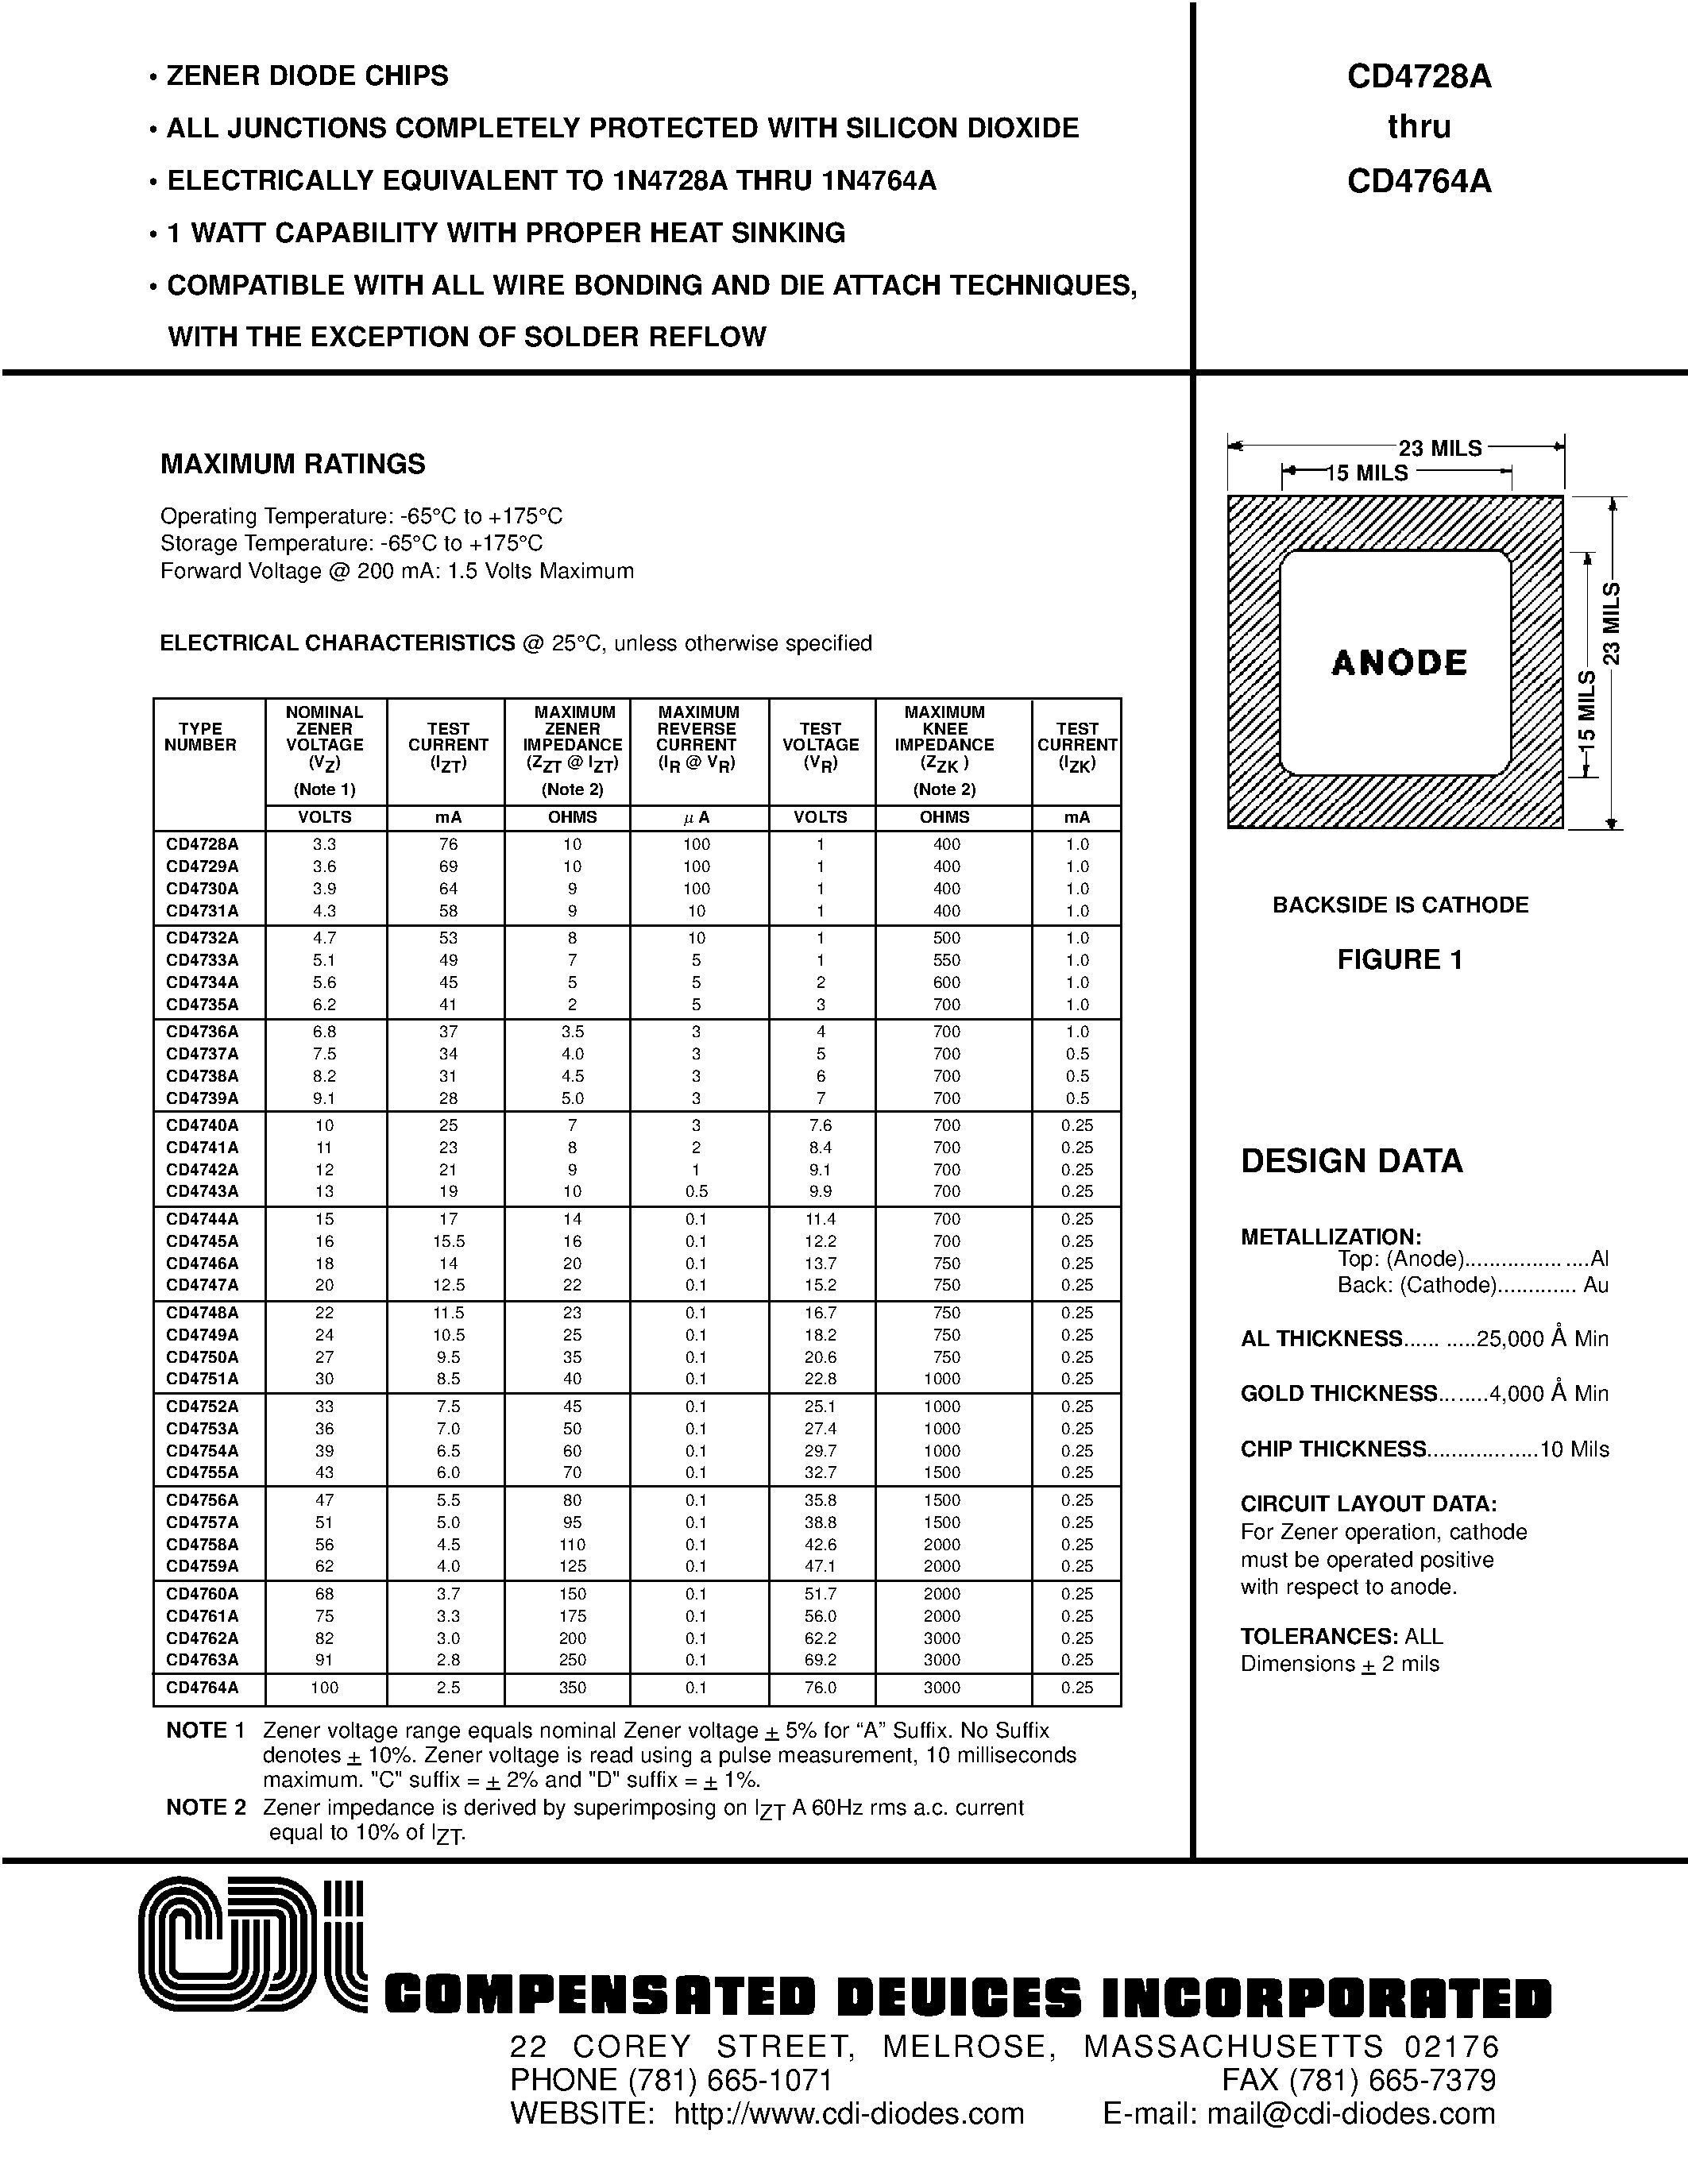 Datasheet CD4755A - ZENER DIODE CHIPS page 1